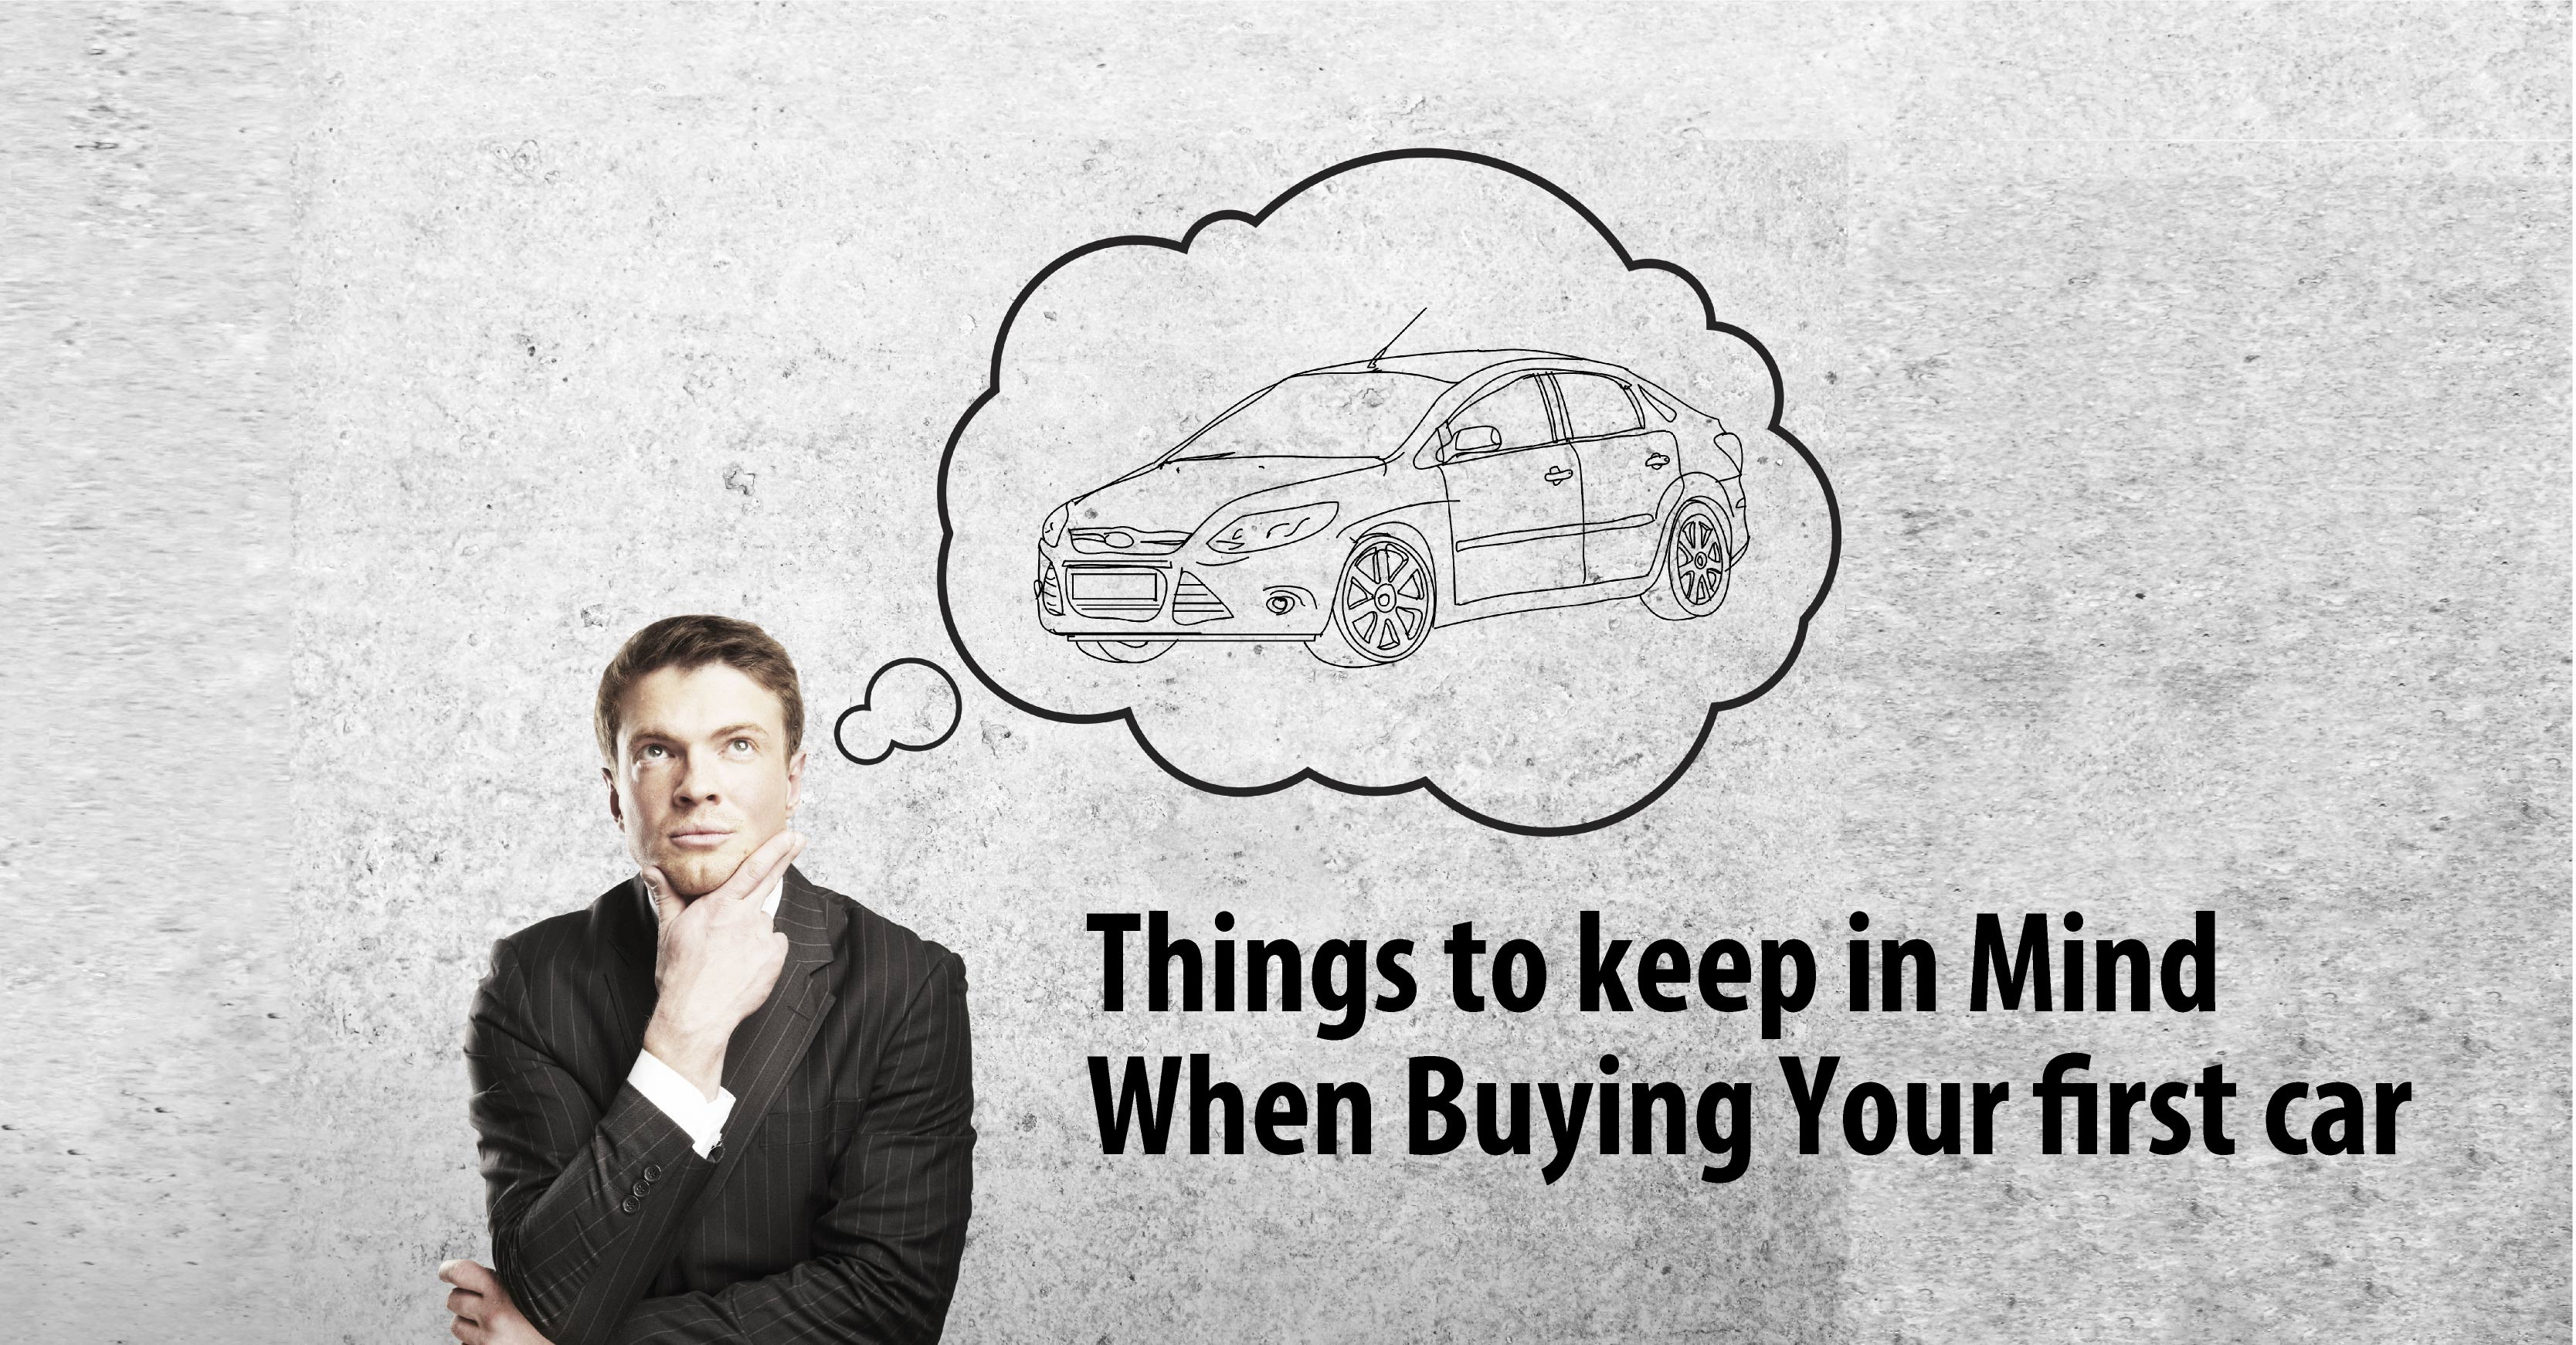 Things to keep in mind when buying your first car